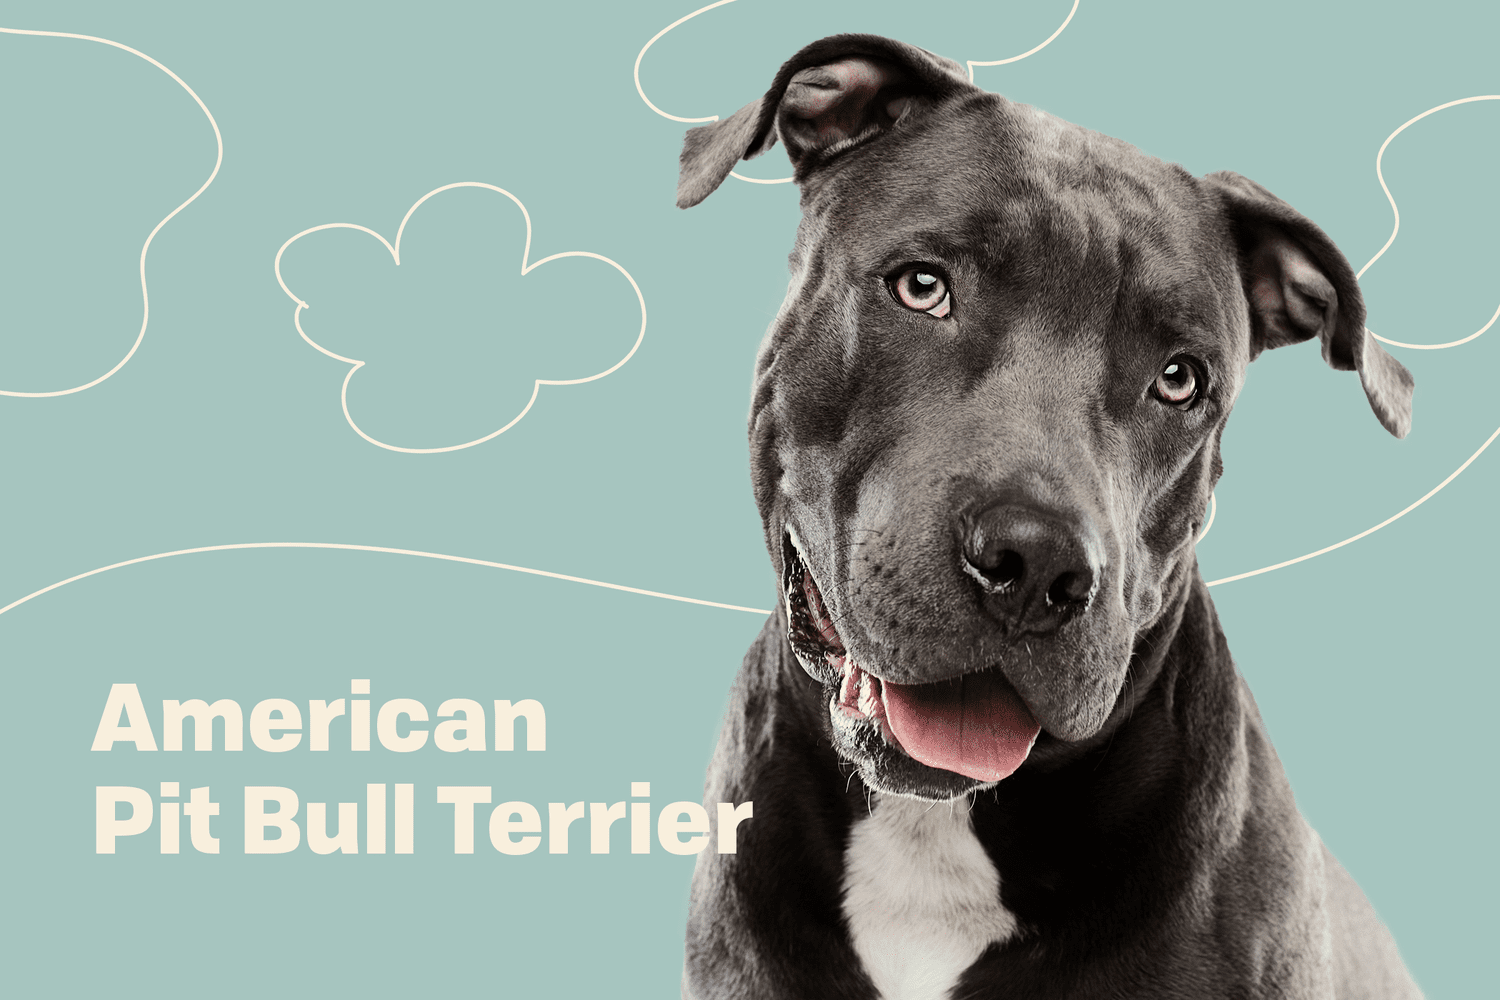 American Pit Bull Terrier dog breed profile treatment